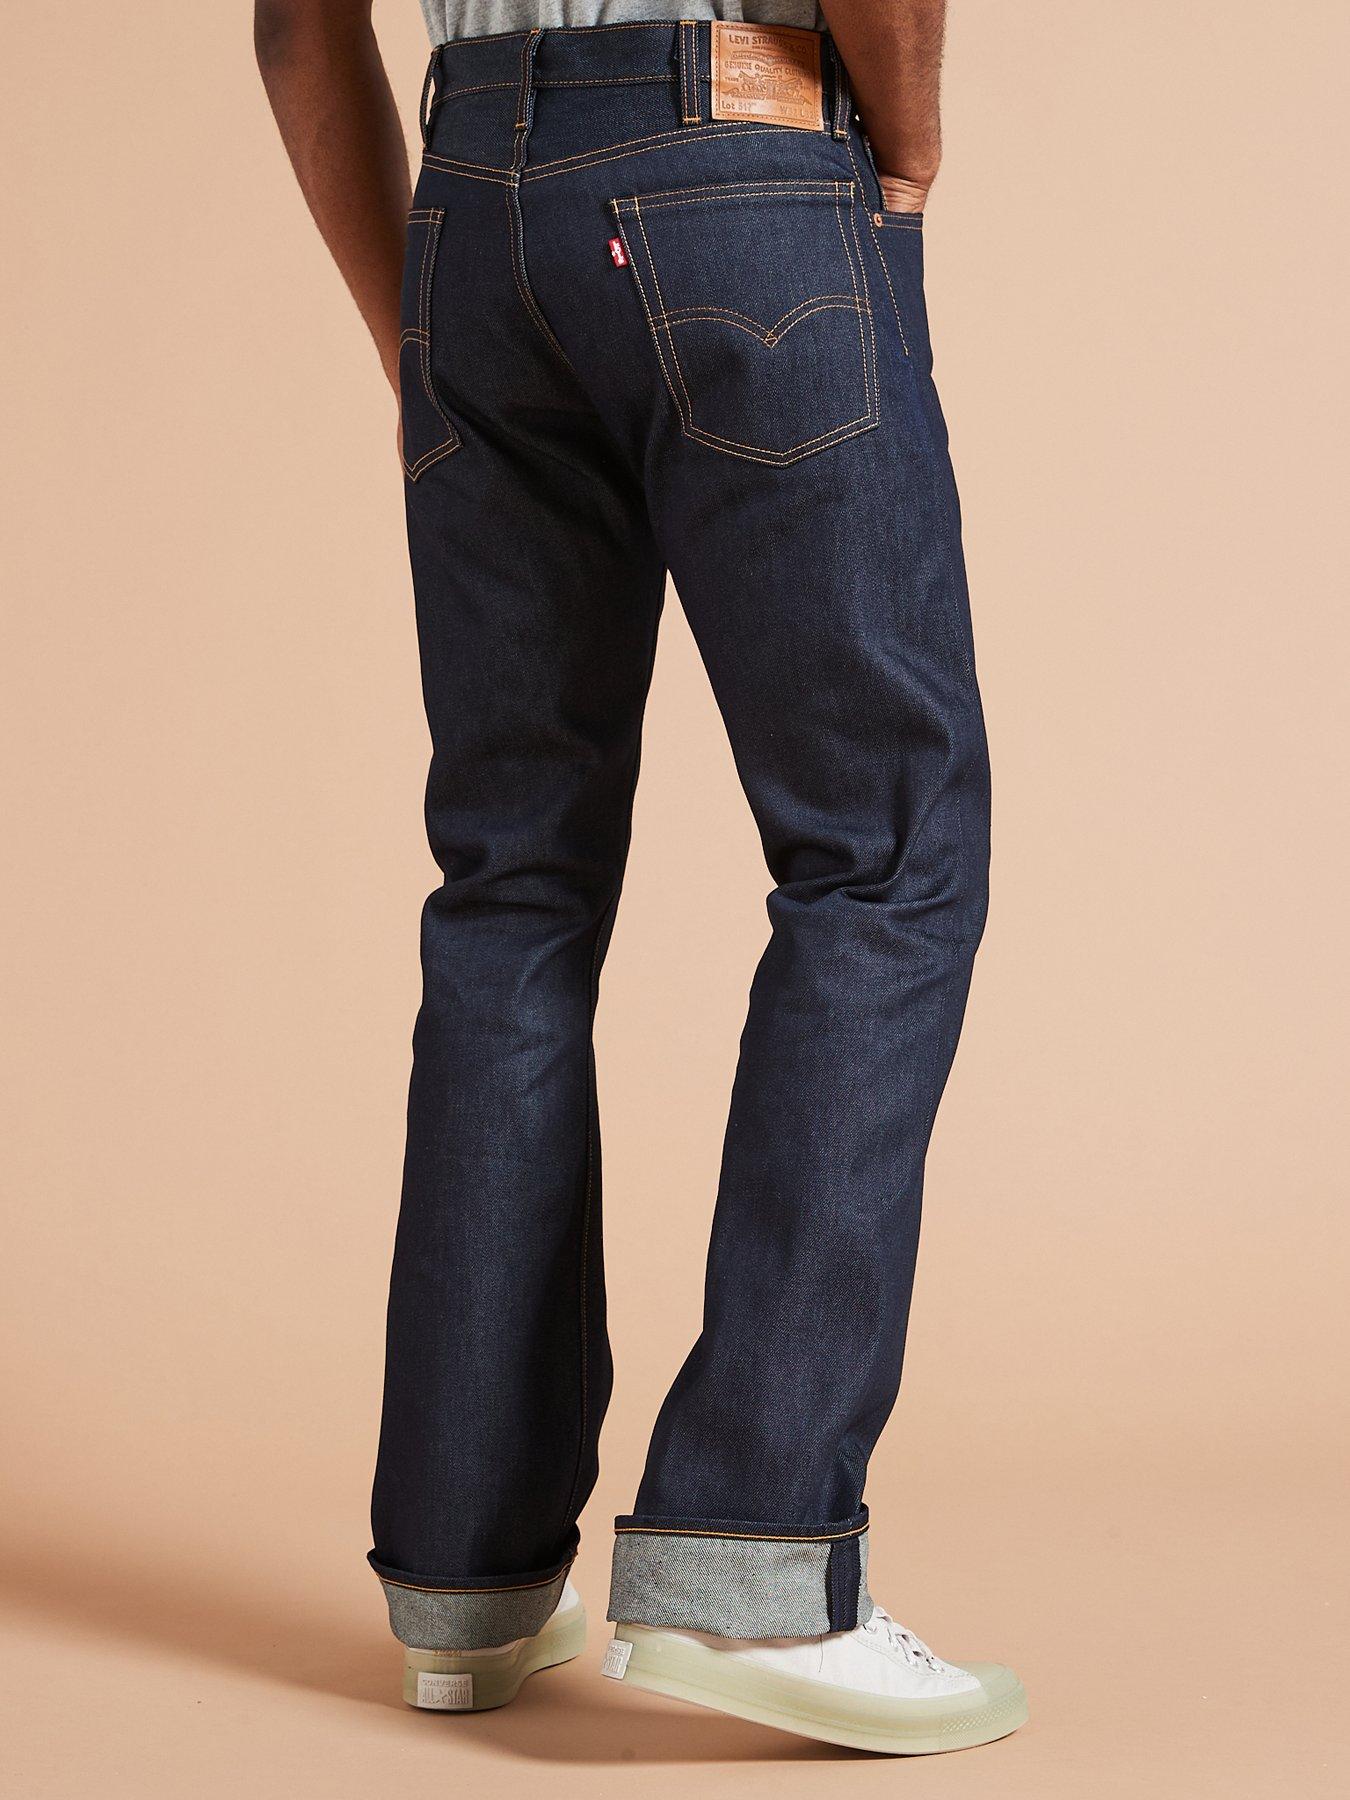 Levi's 517 Straight Bootcut Jeans - Make It Yours - Dark Blue ...